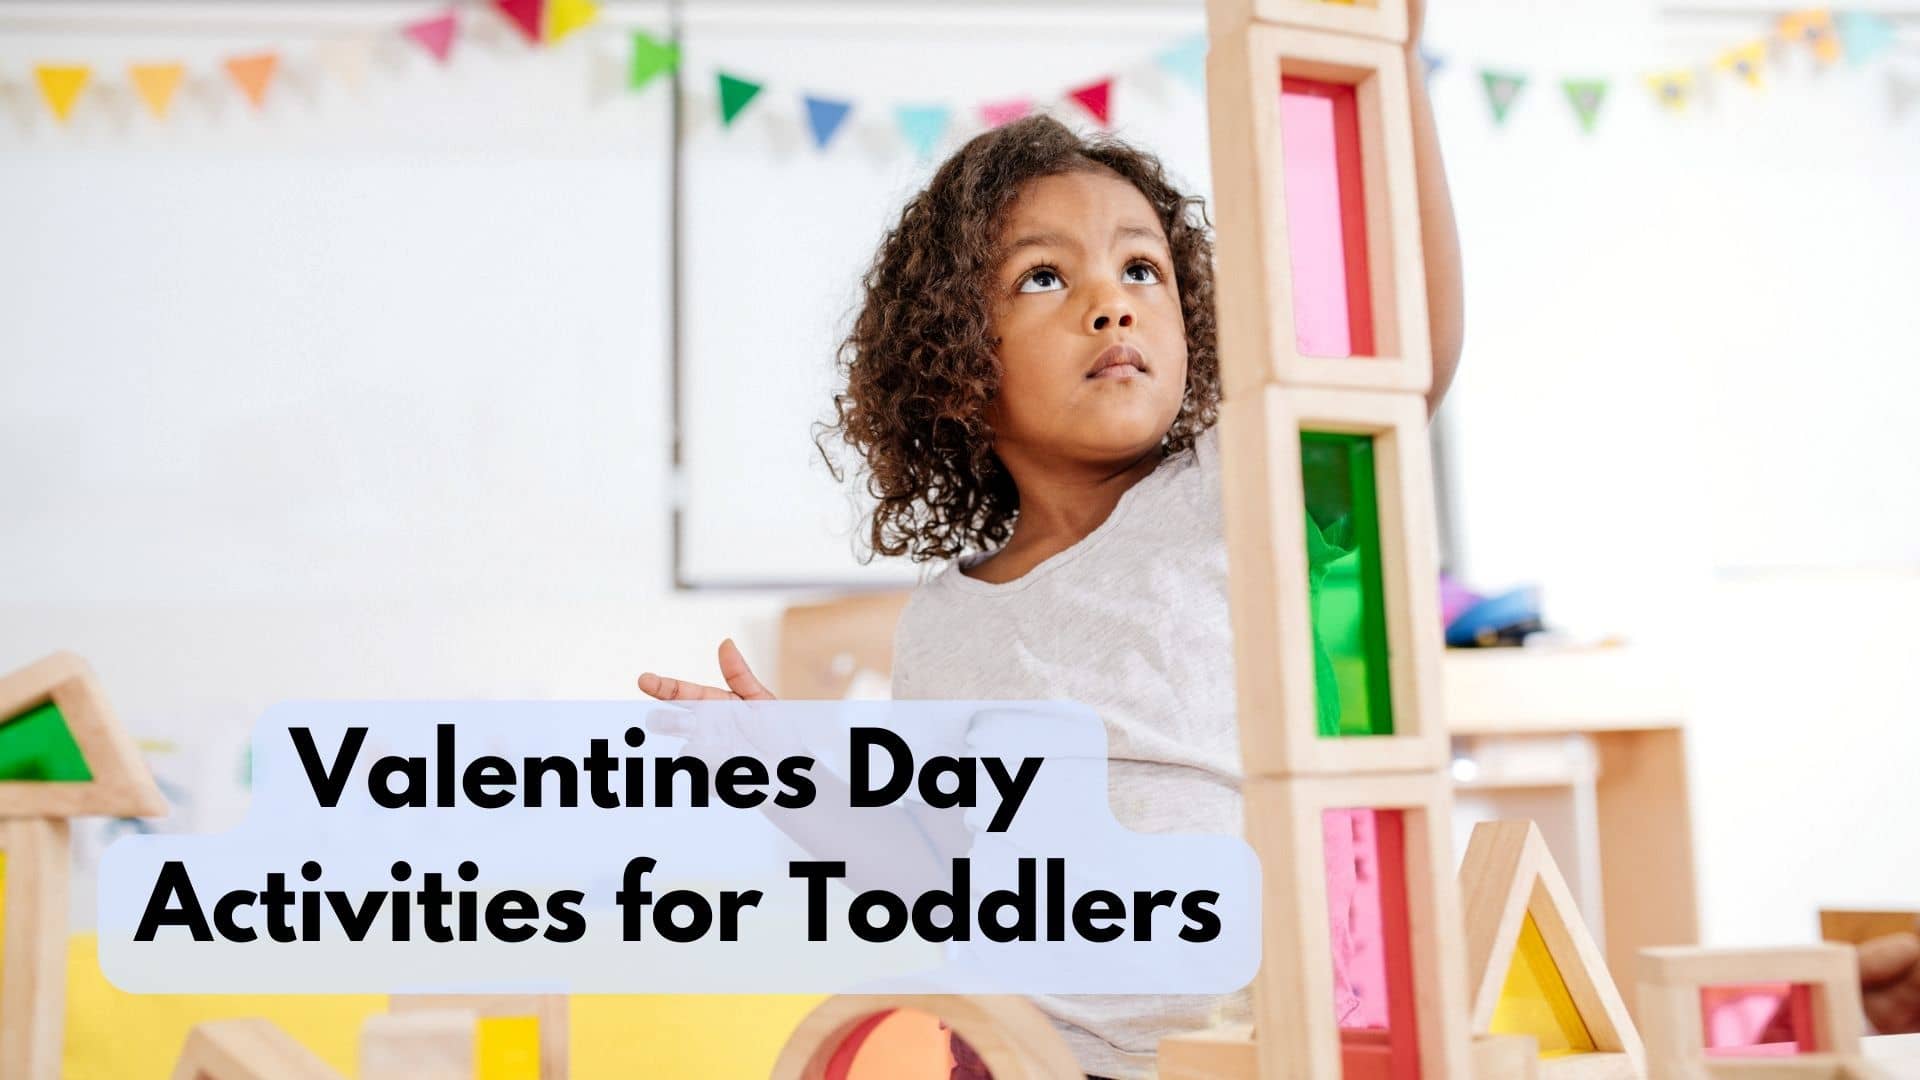 Fun and Creative Valentines Day Activities for Toddlers